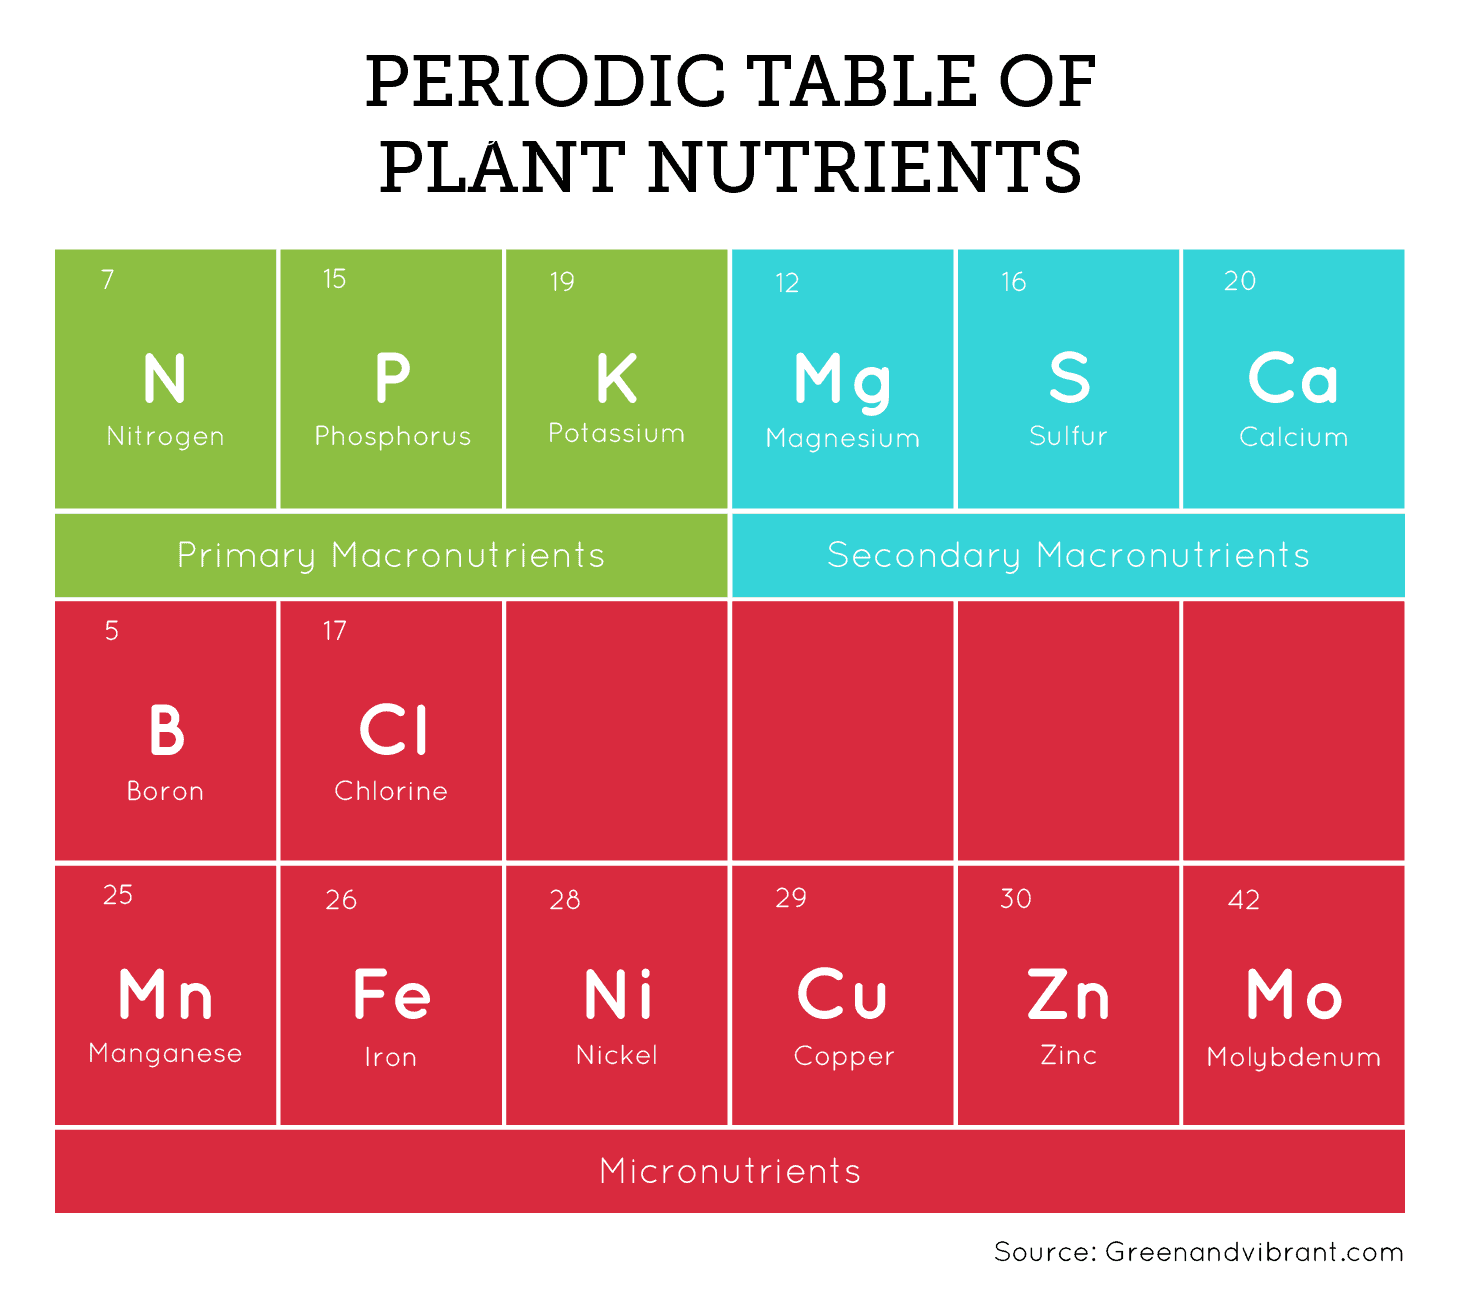 Periodic Tables of Plant Nutrients